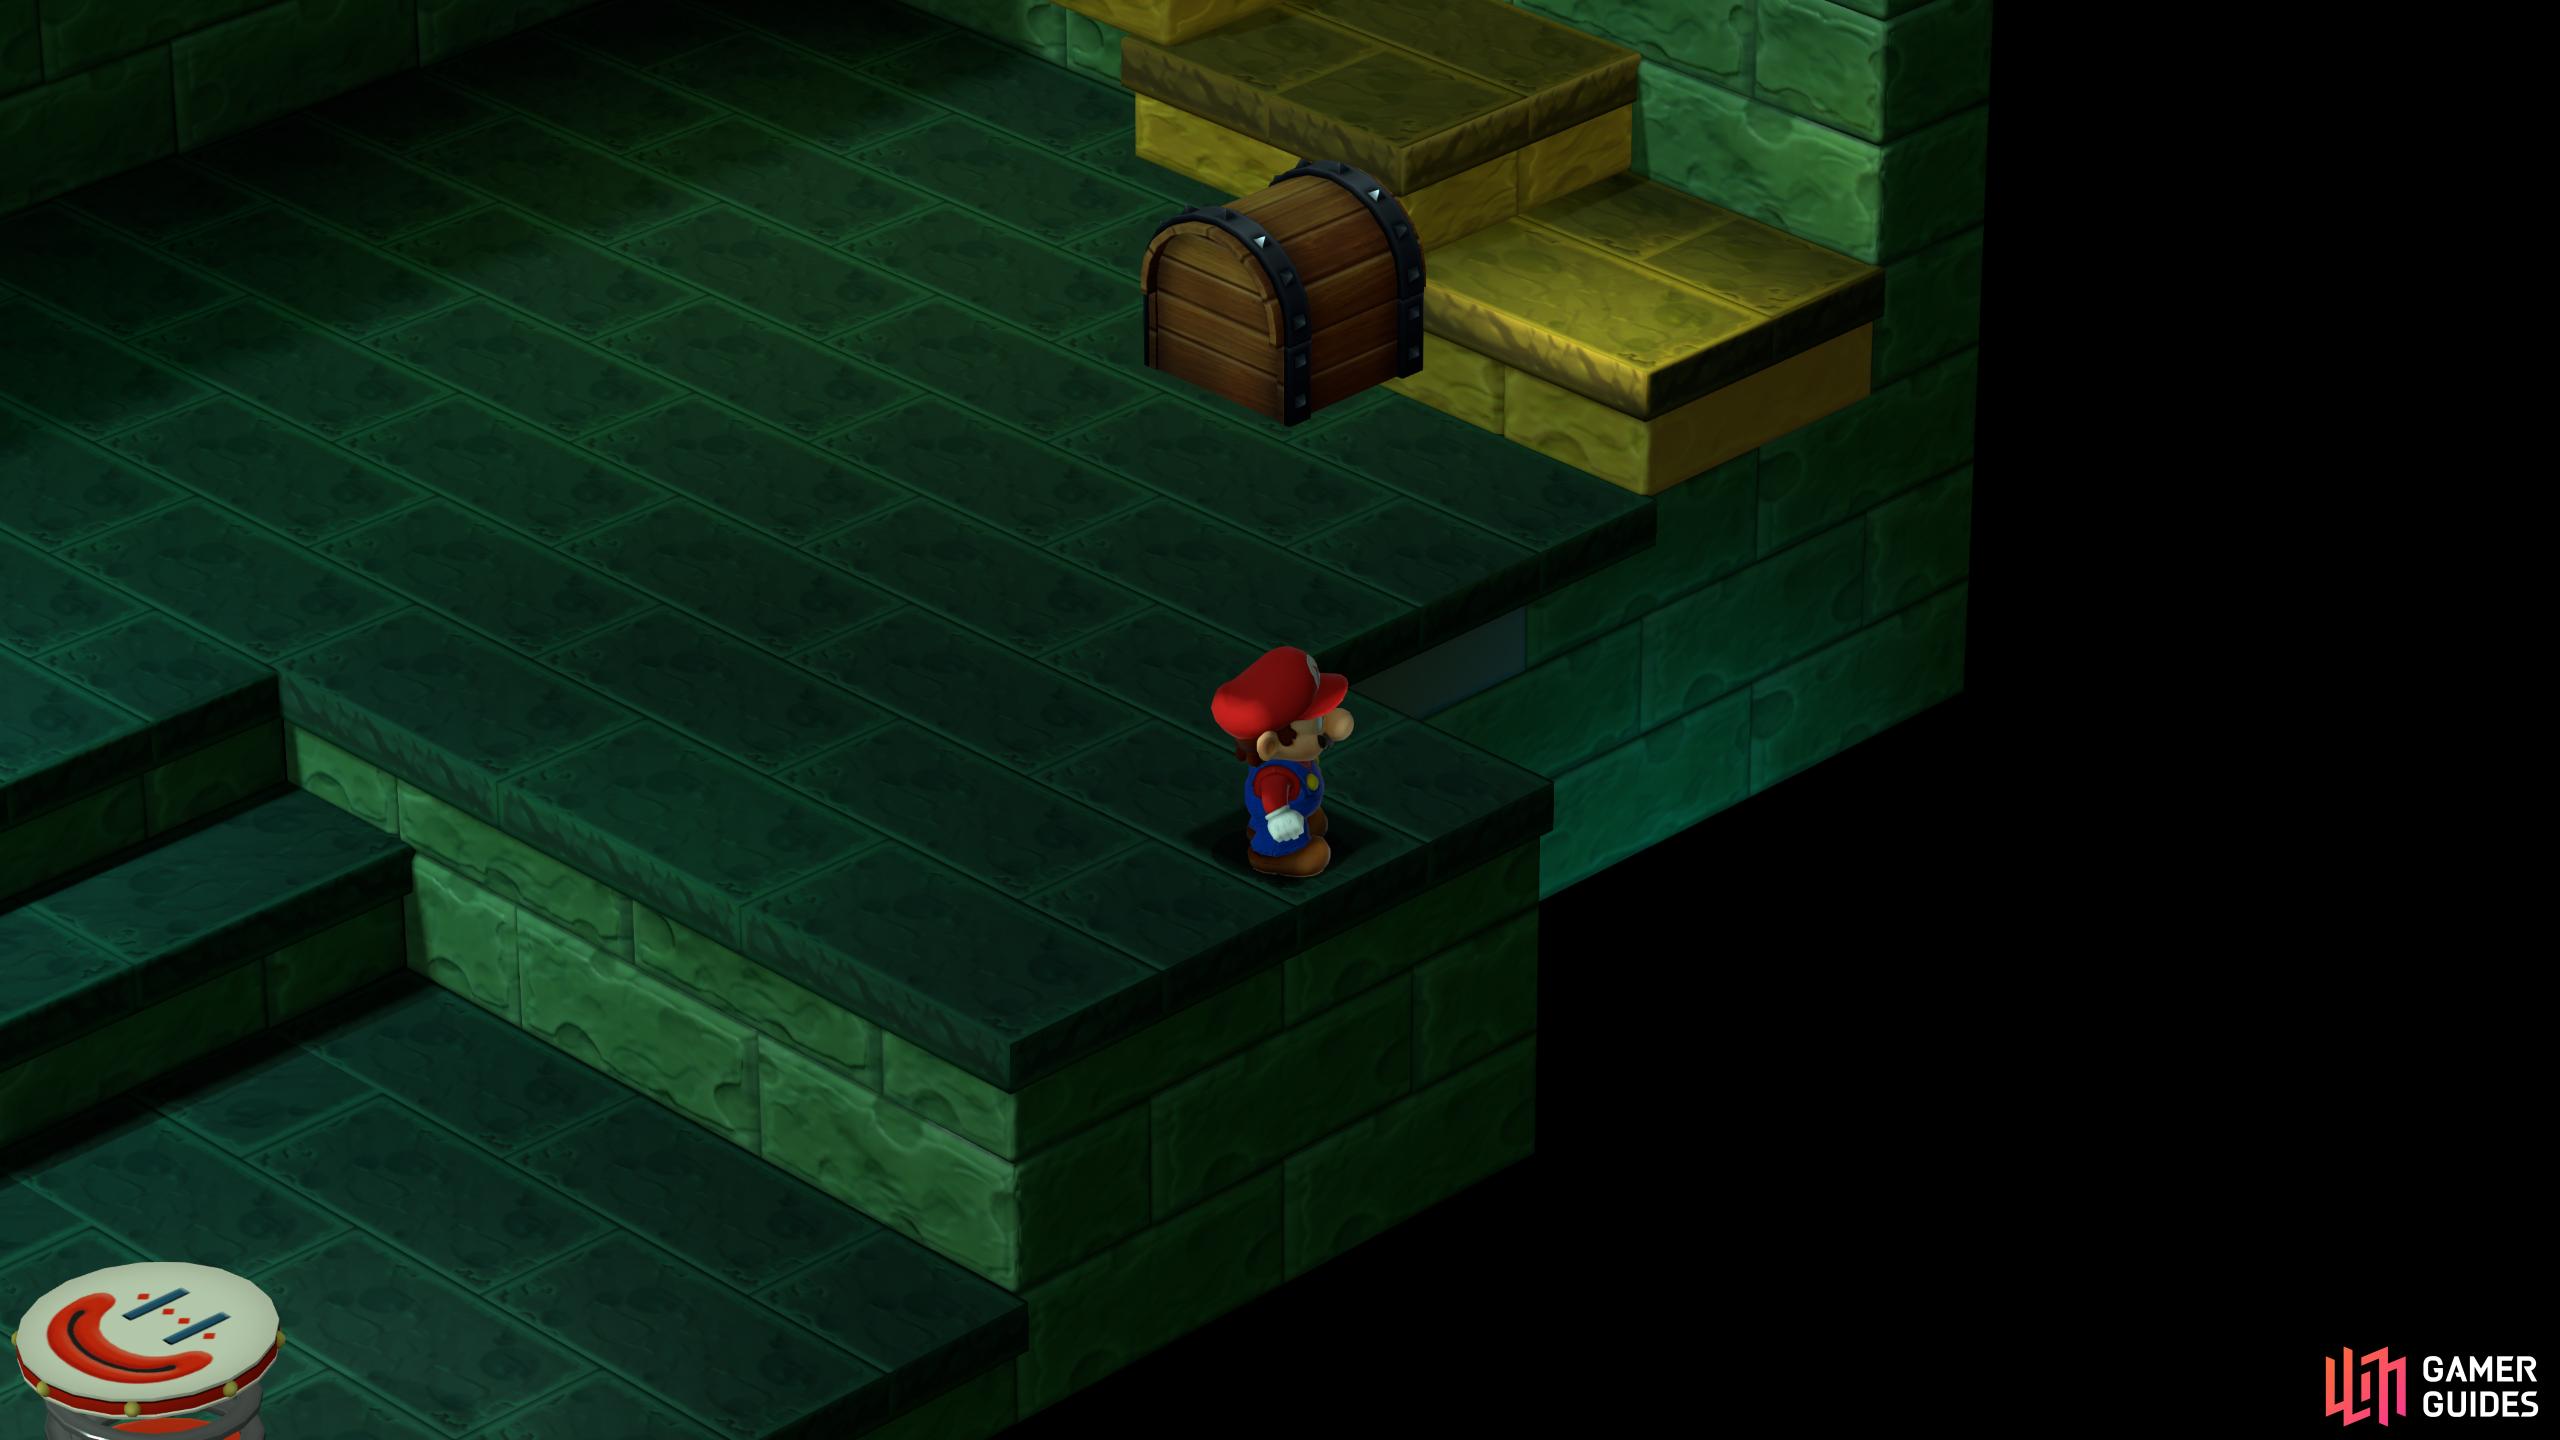 Hidden Treasure 2: Jump up the ledge to the east, and jump up when you reach the third block for the treasure.